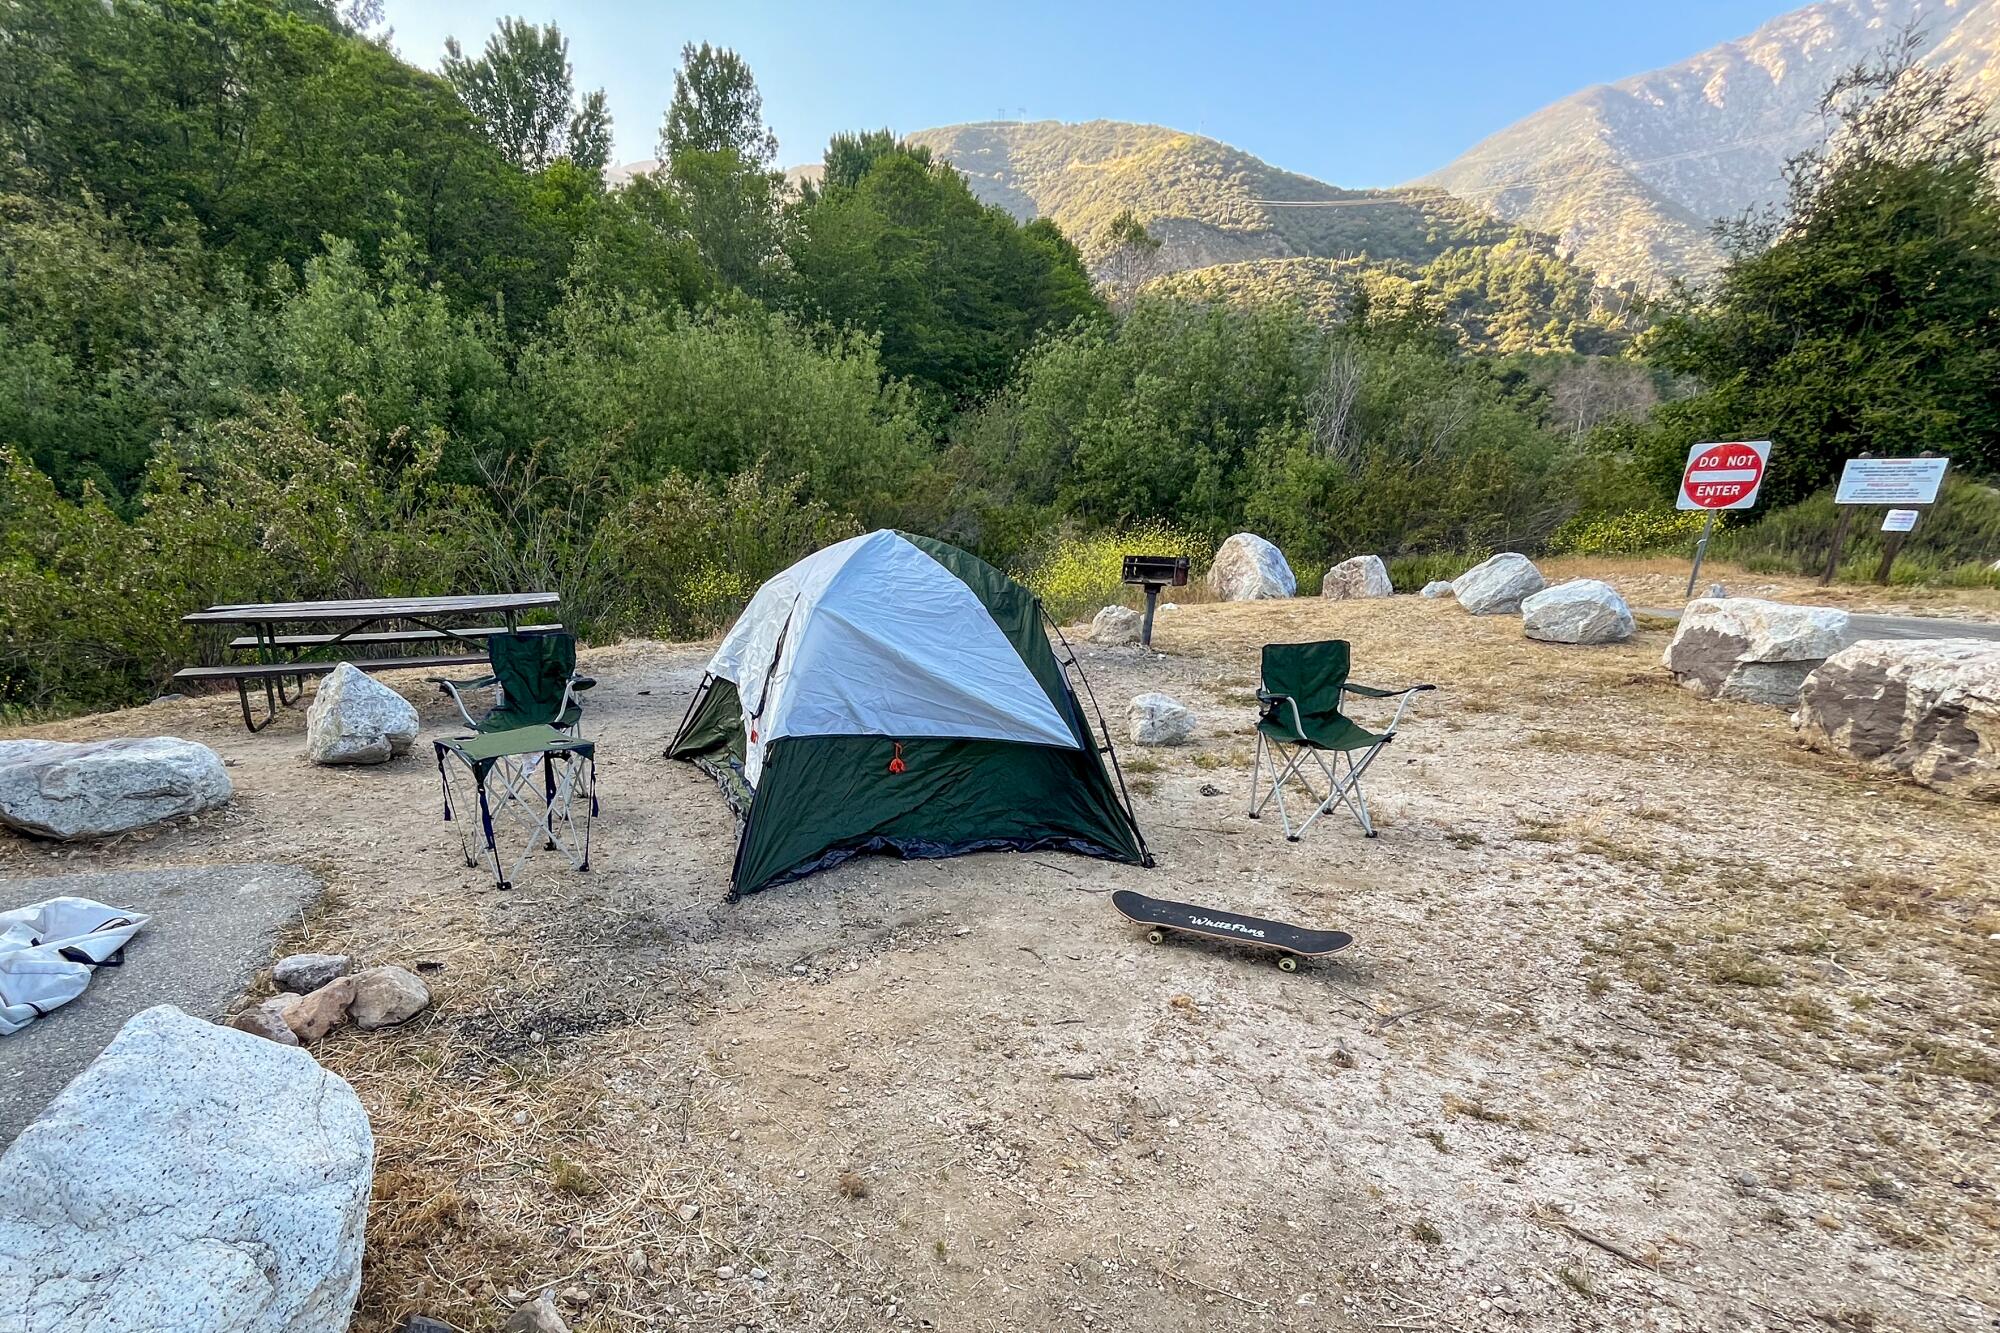 A gray tent set up in the sandy dirt of a campground